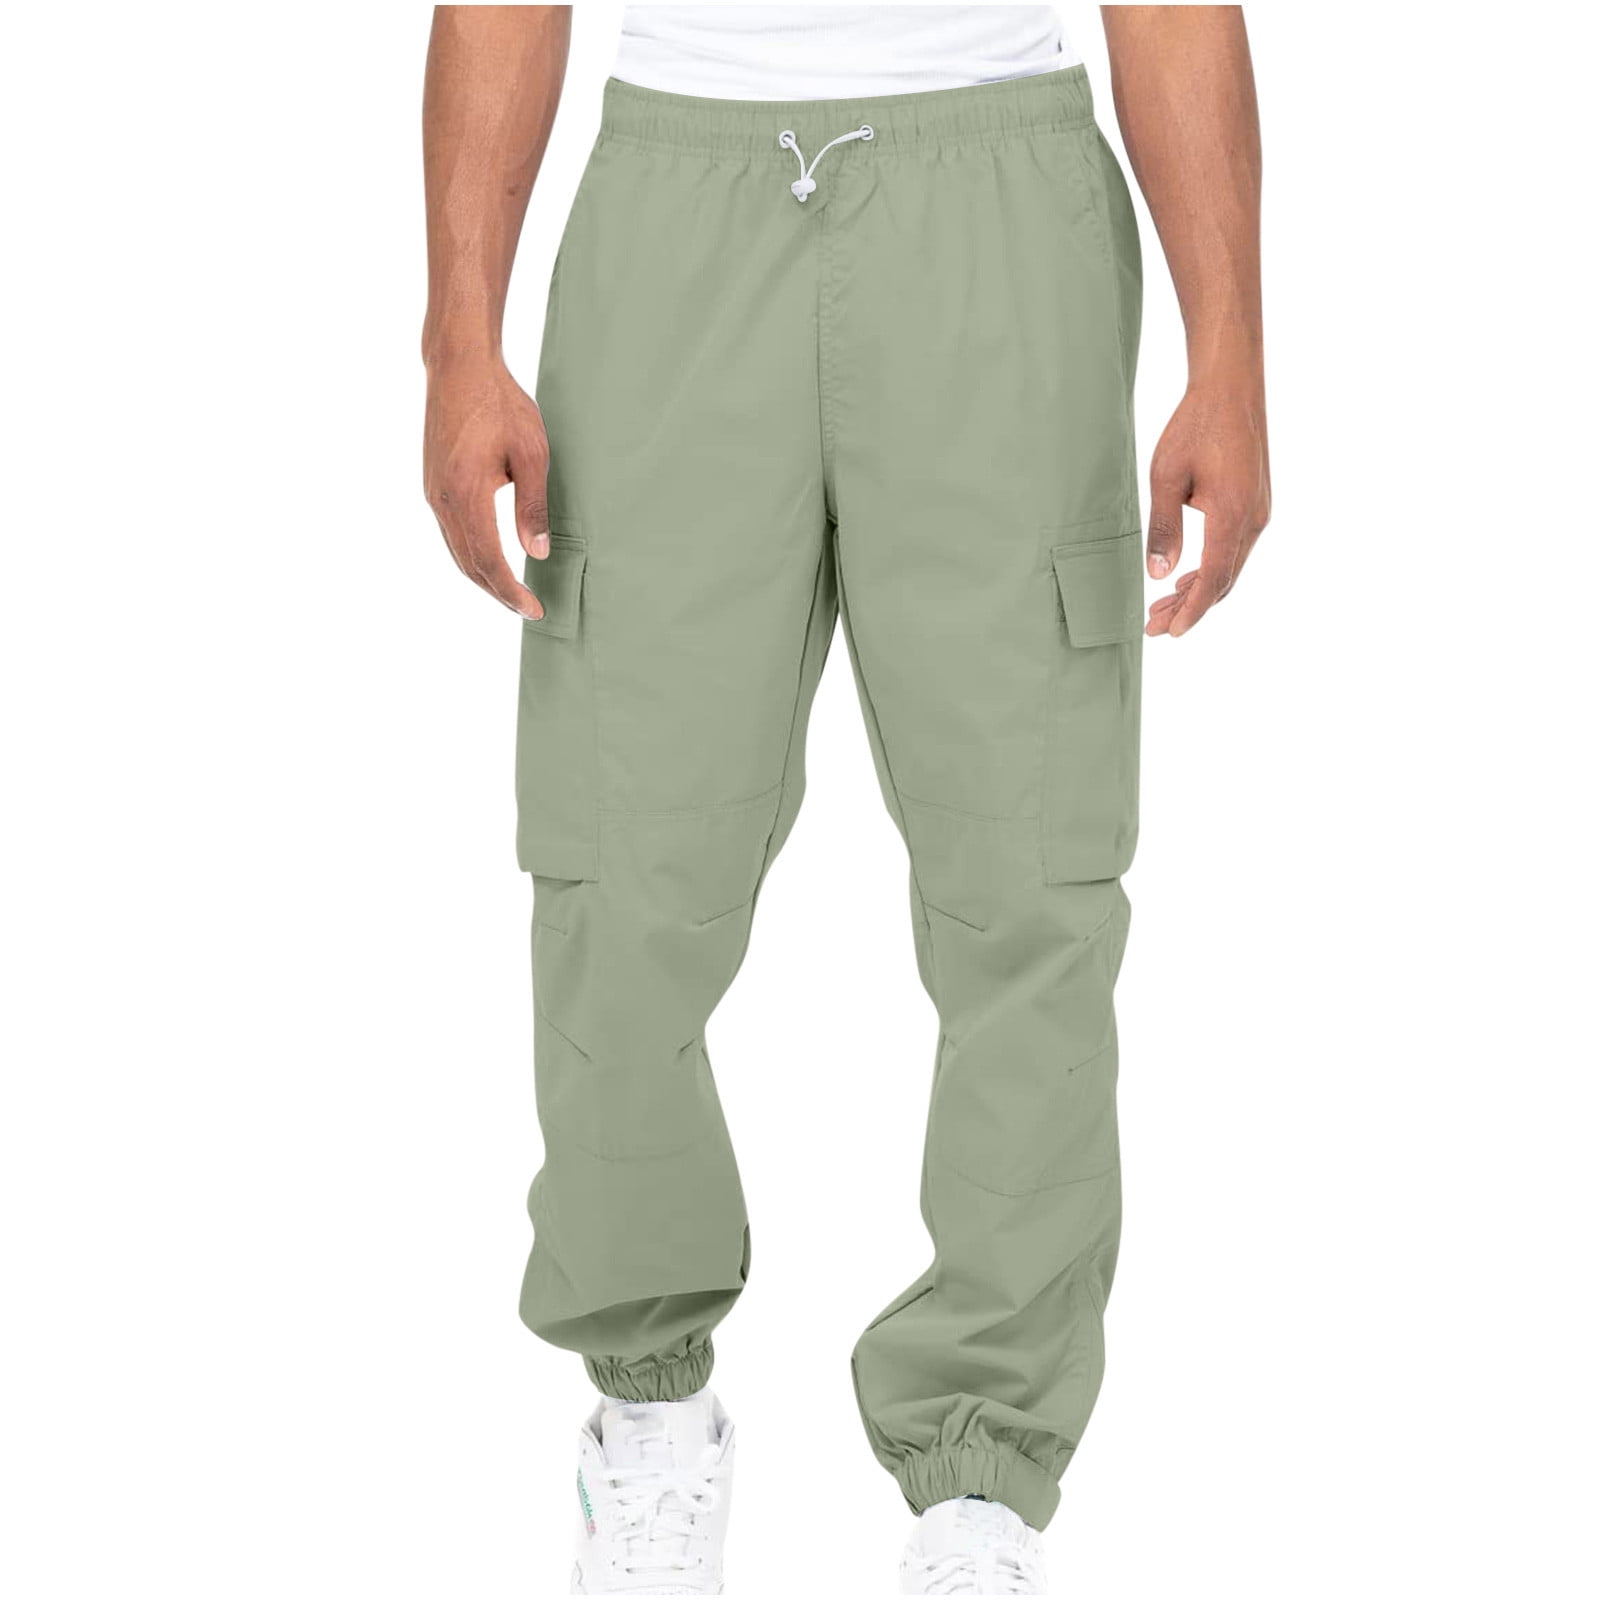 Work Trousers Cargo Pants Mens Multi-Pockets Quick Dry Combat Outdoor  Climbing | eBay